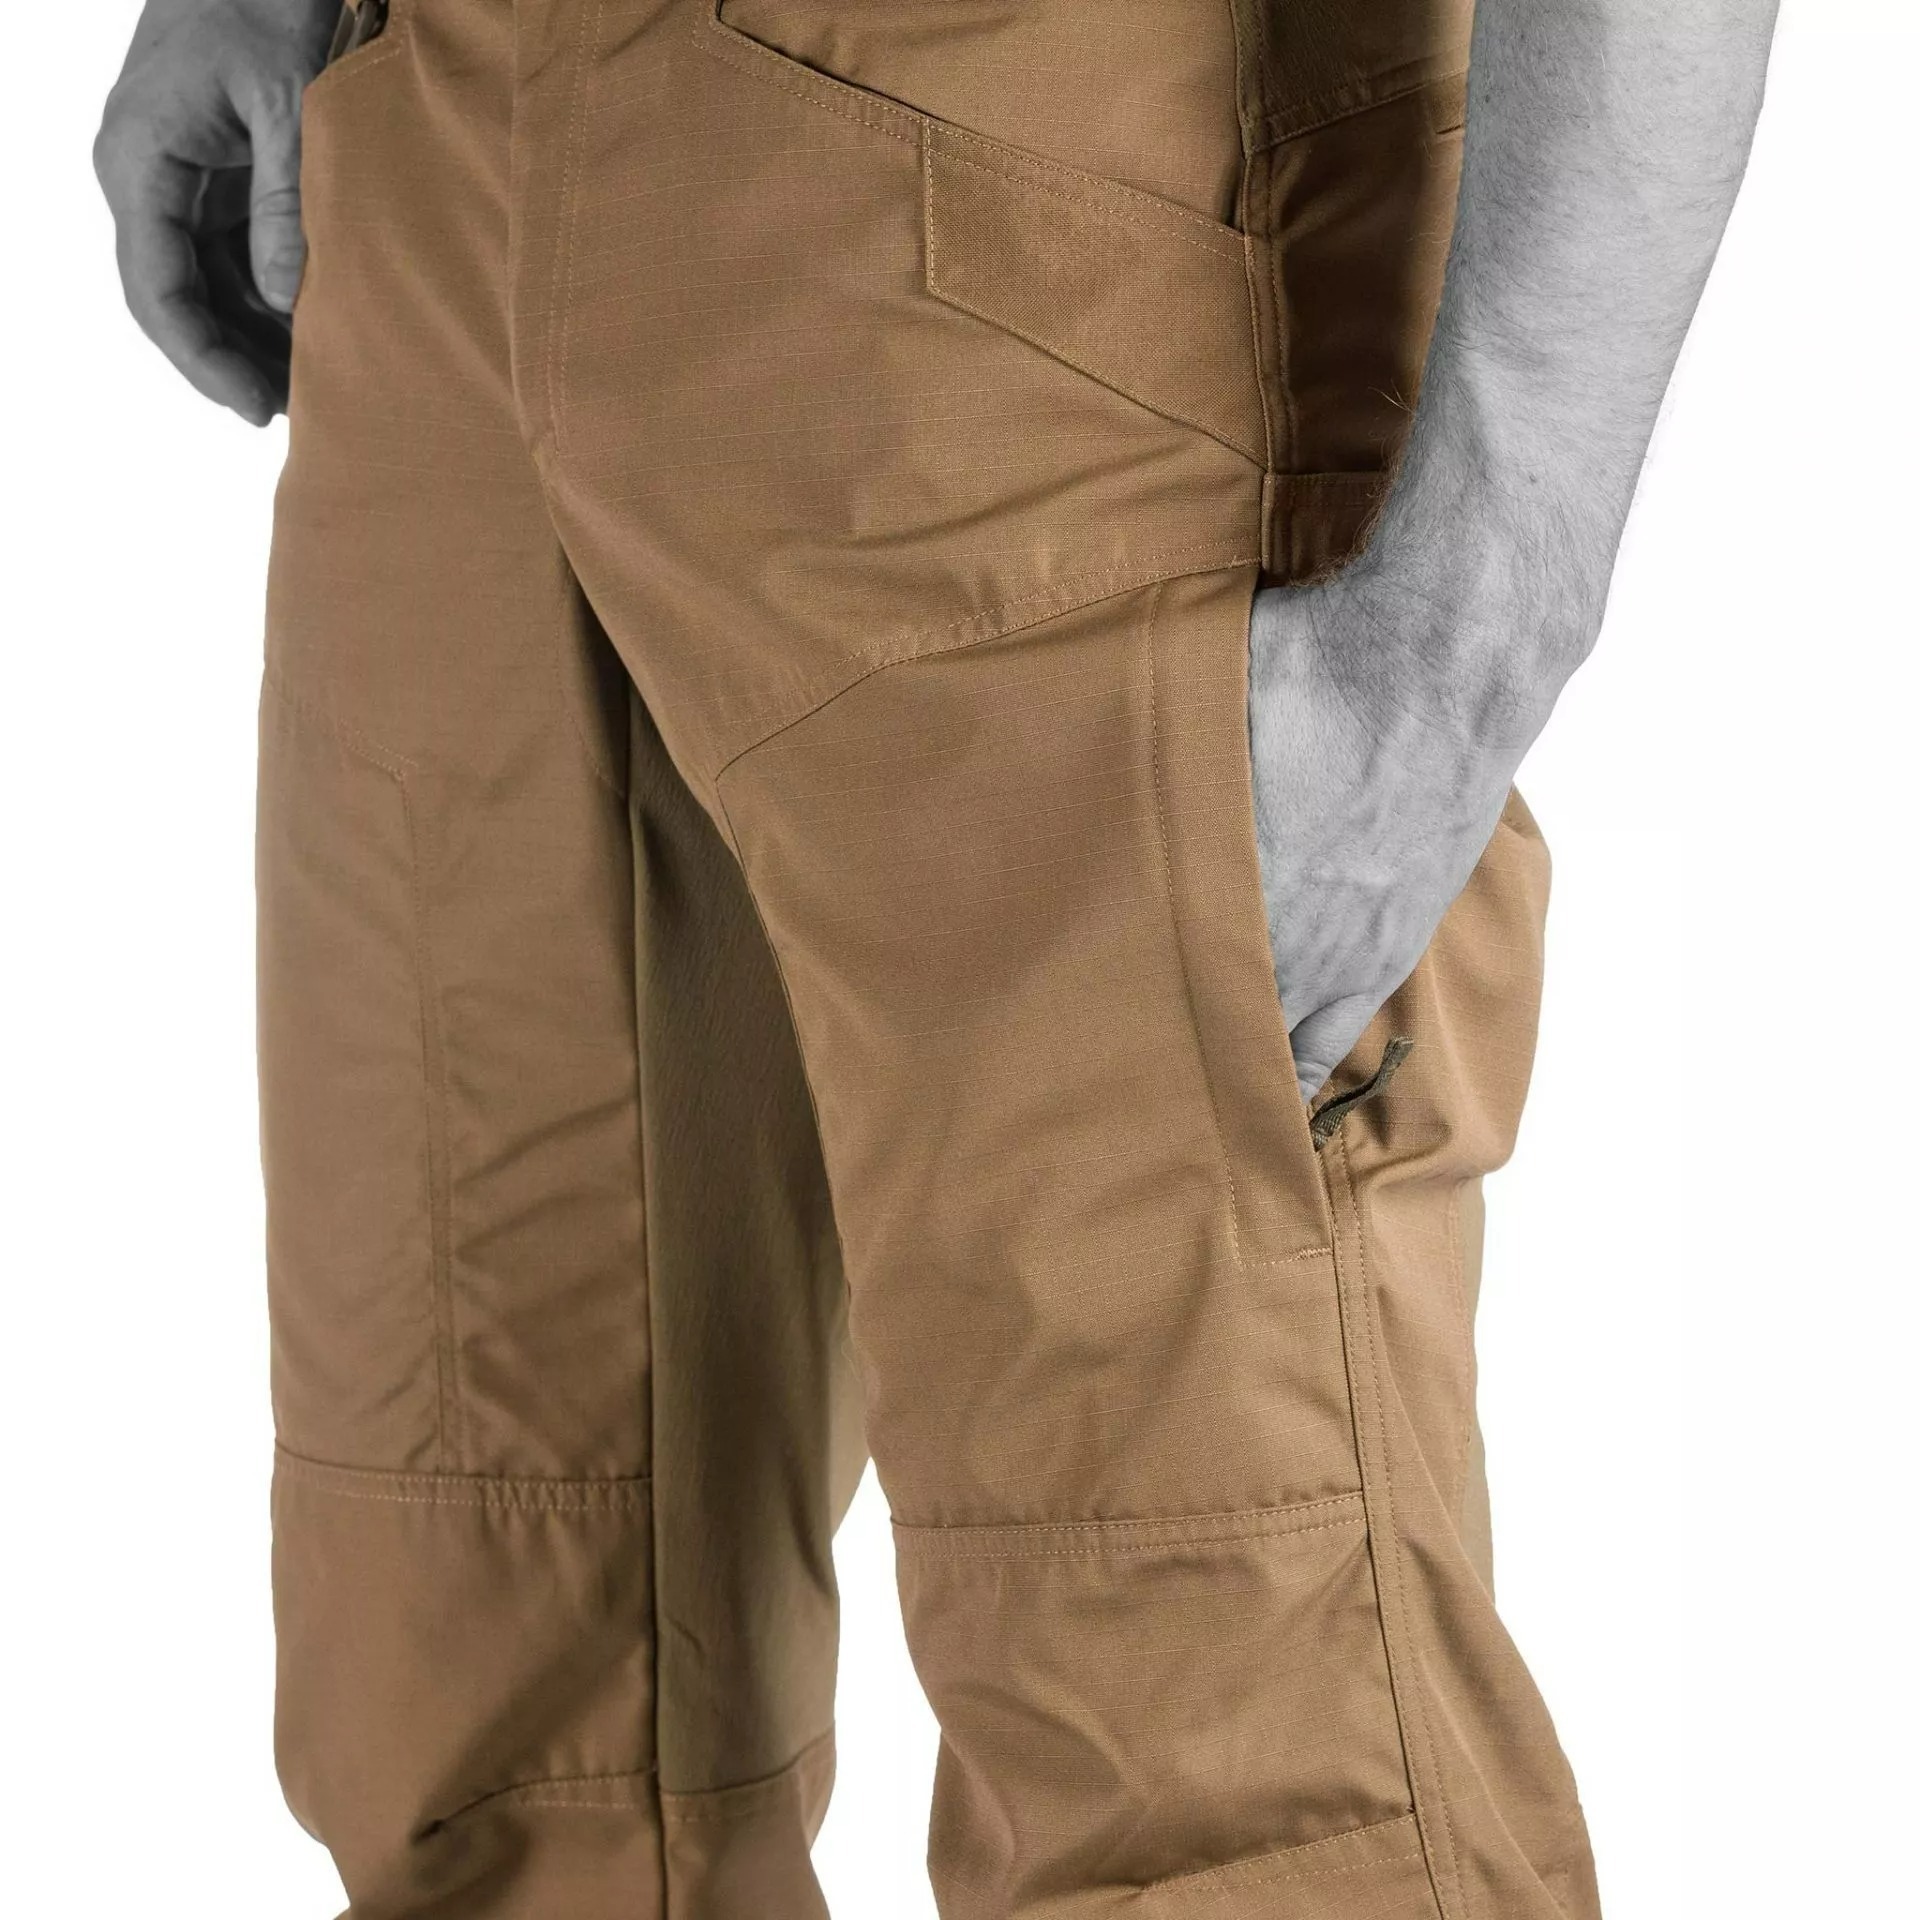 LIGHTWEIGHT RIPSTOP WATERPROOF PANTS-FOR MALE OR FEMALE